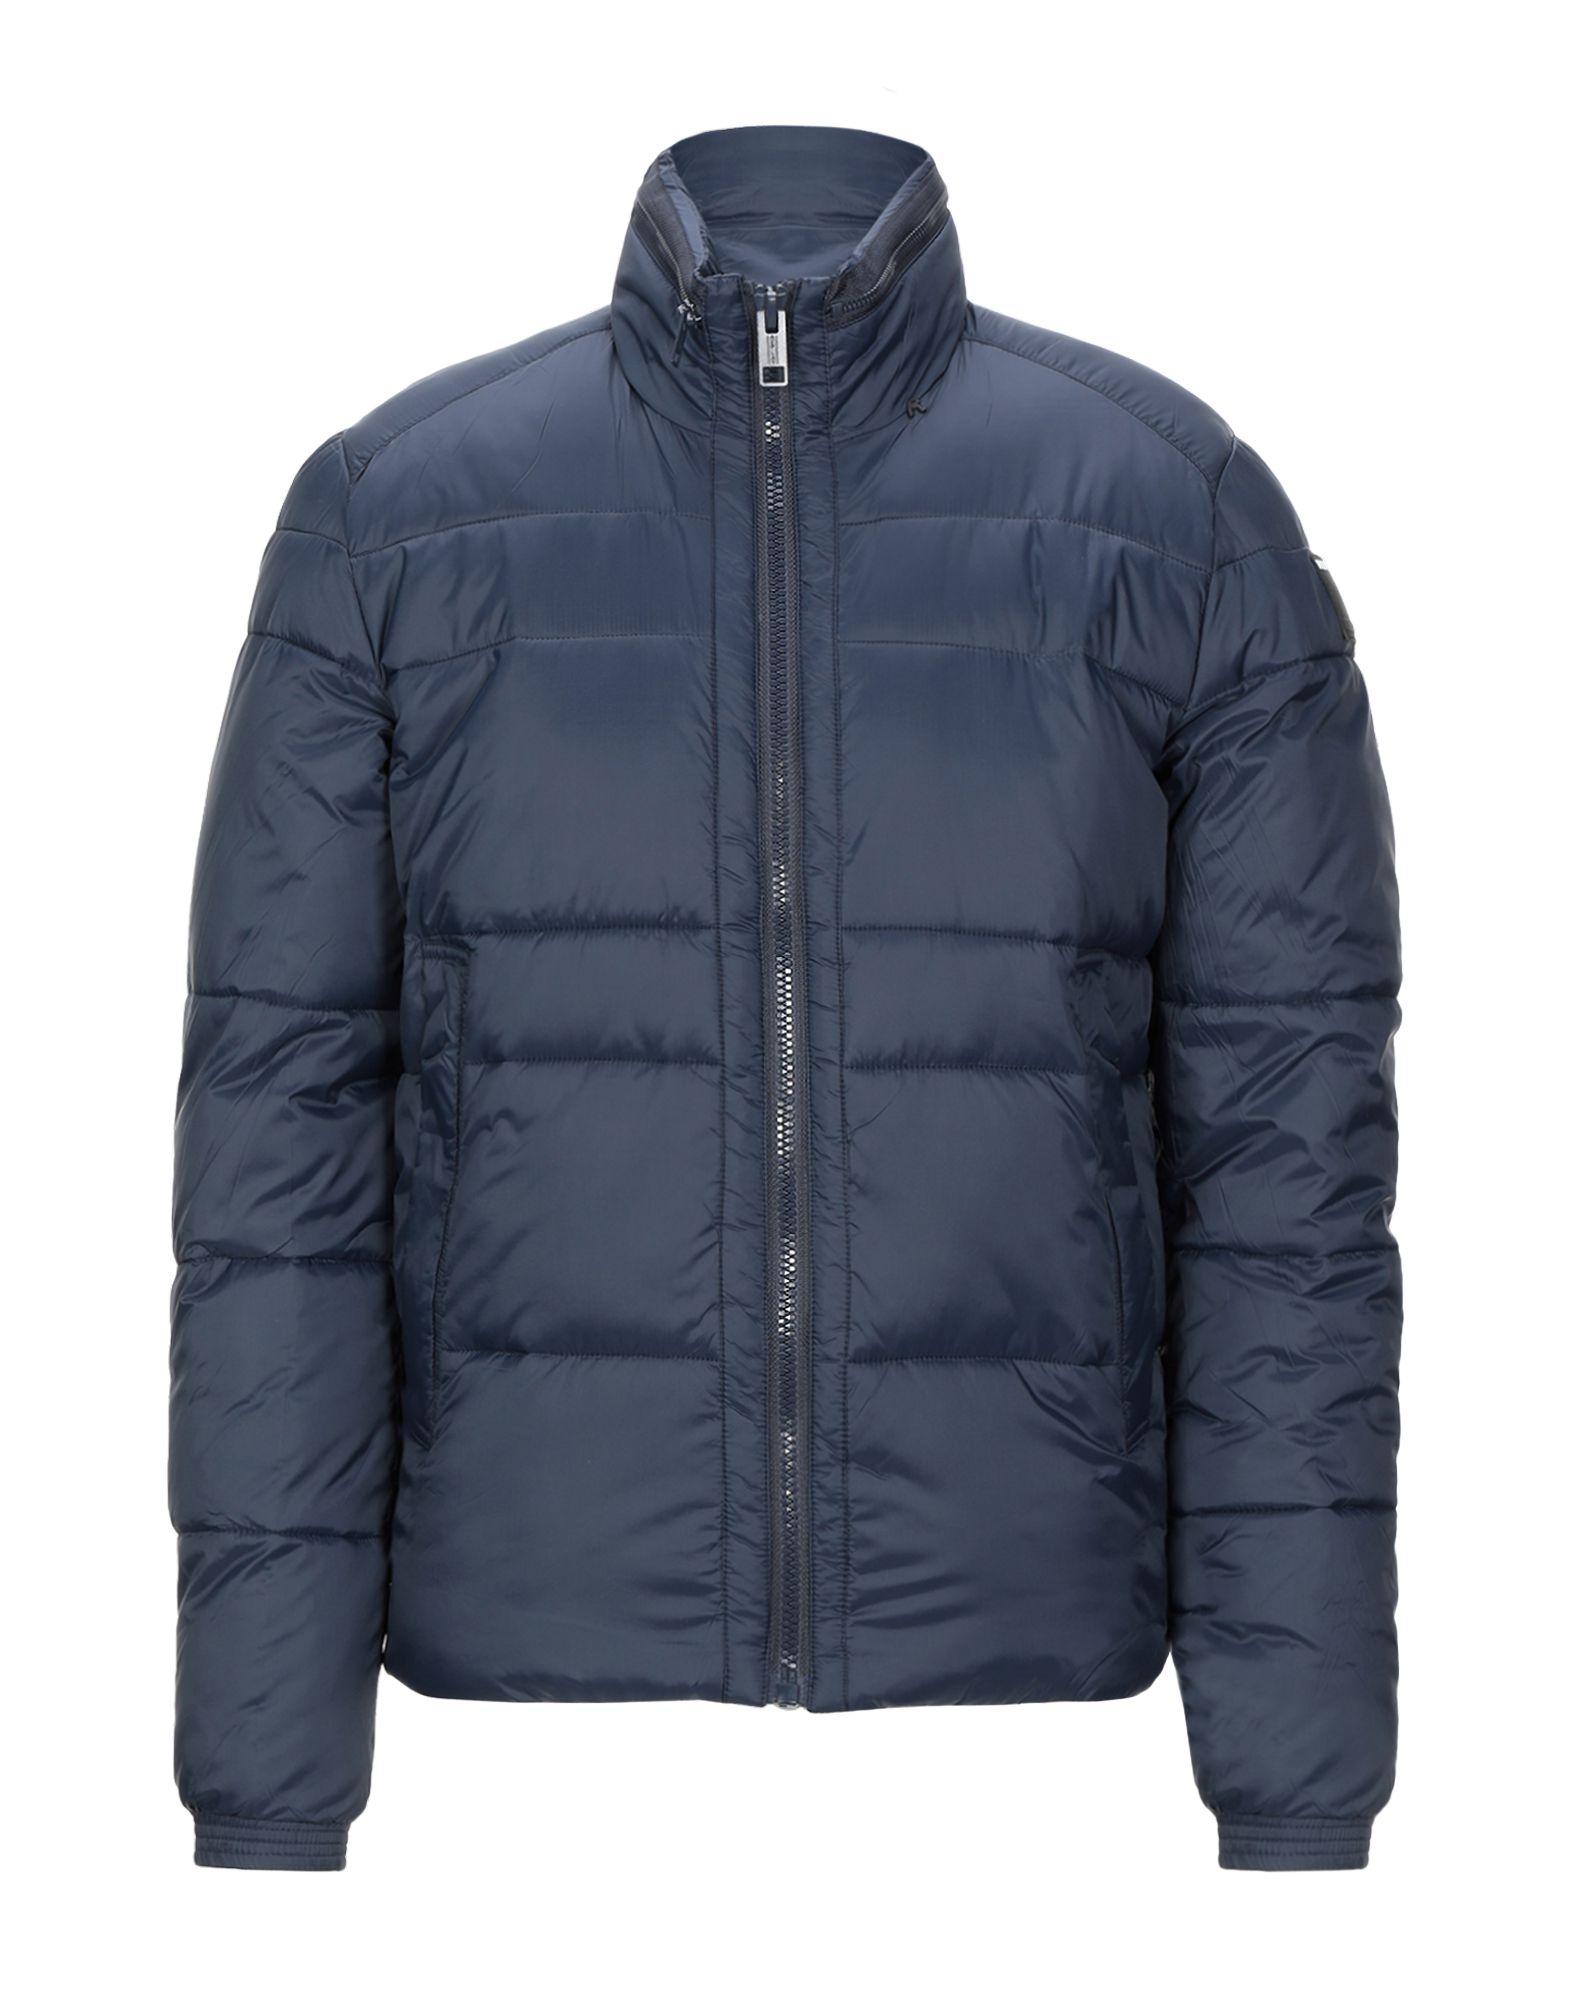 Replay Synthetic Down Jacket in Dark Blue (Blue) for Men - Lyst